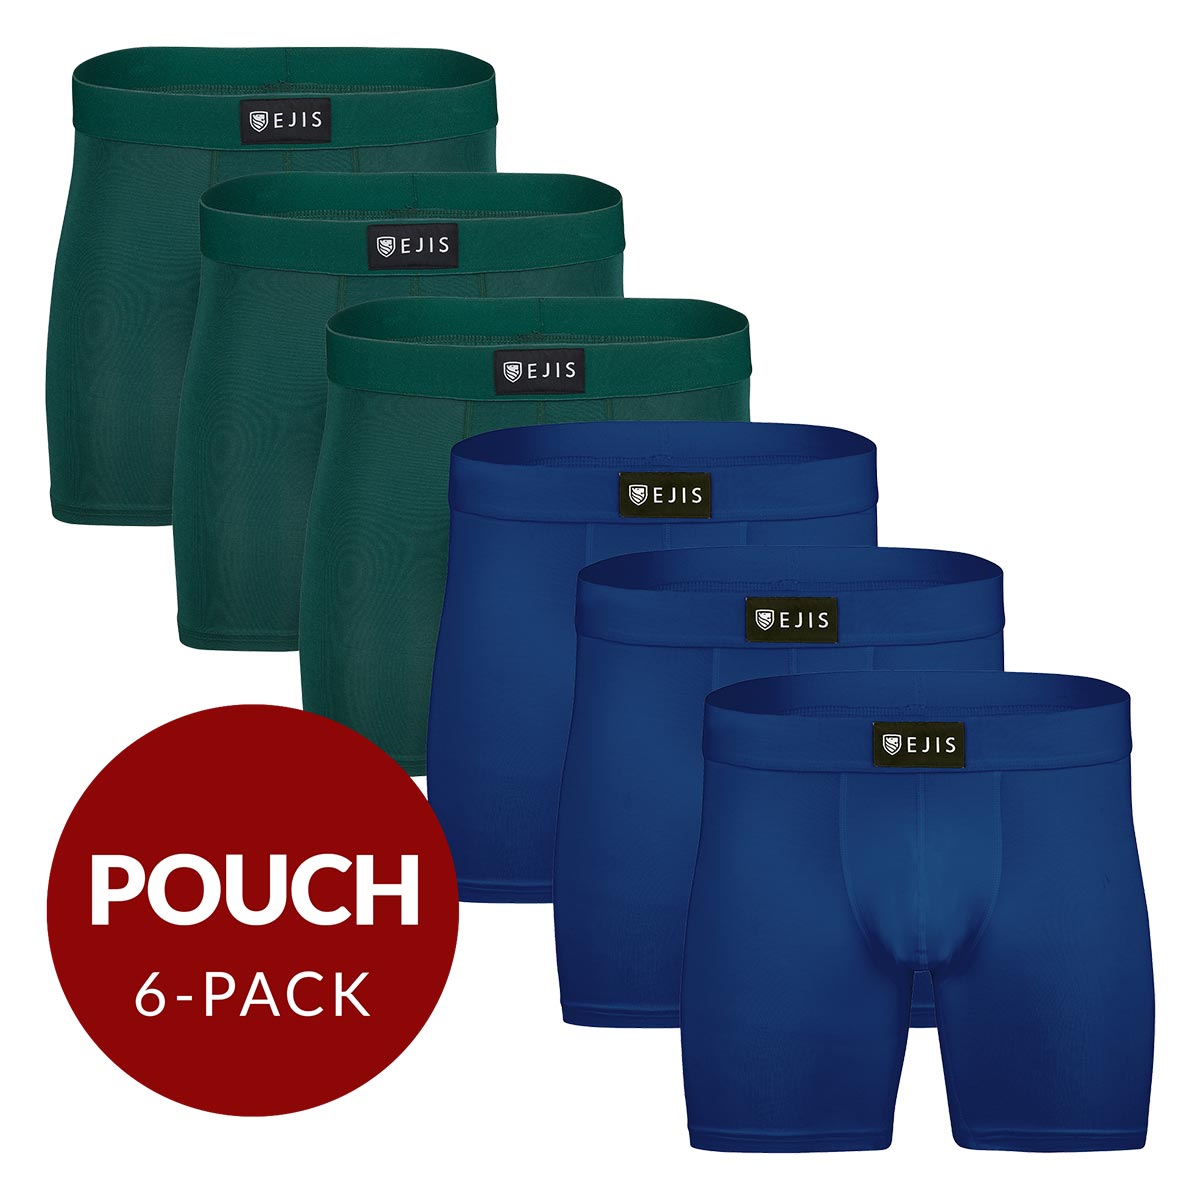 Sweat Proof Men's Boxer Briefs with Pouch - Mix 6-Pack (3x Green, Navy) - Ejis